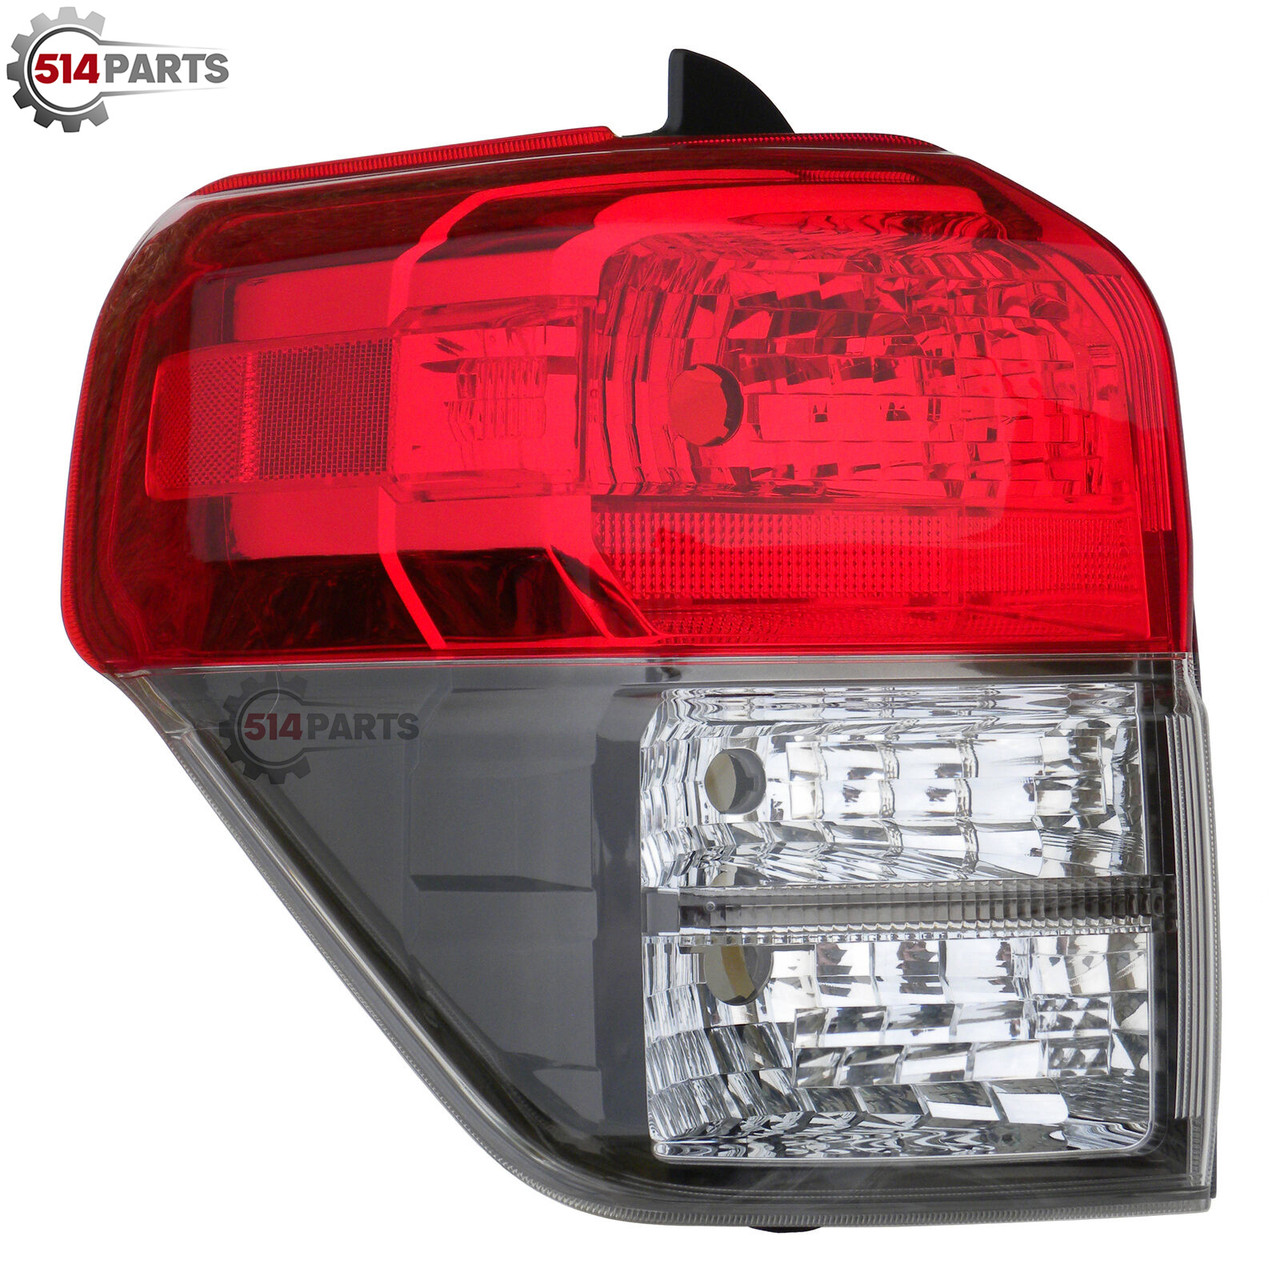 2010 - 2013 TOYOTA 4Runner TRAIL TAIL LIGHTS High Quality - PHARES ARRIERE Haute Qualite